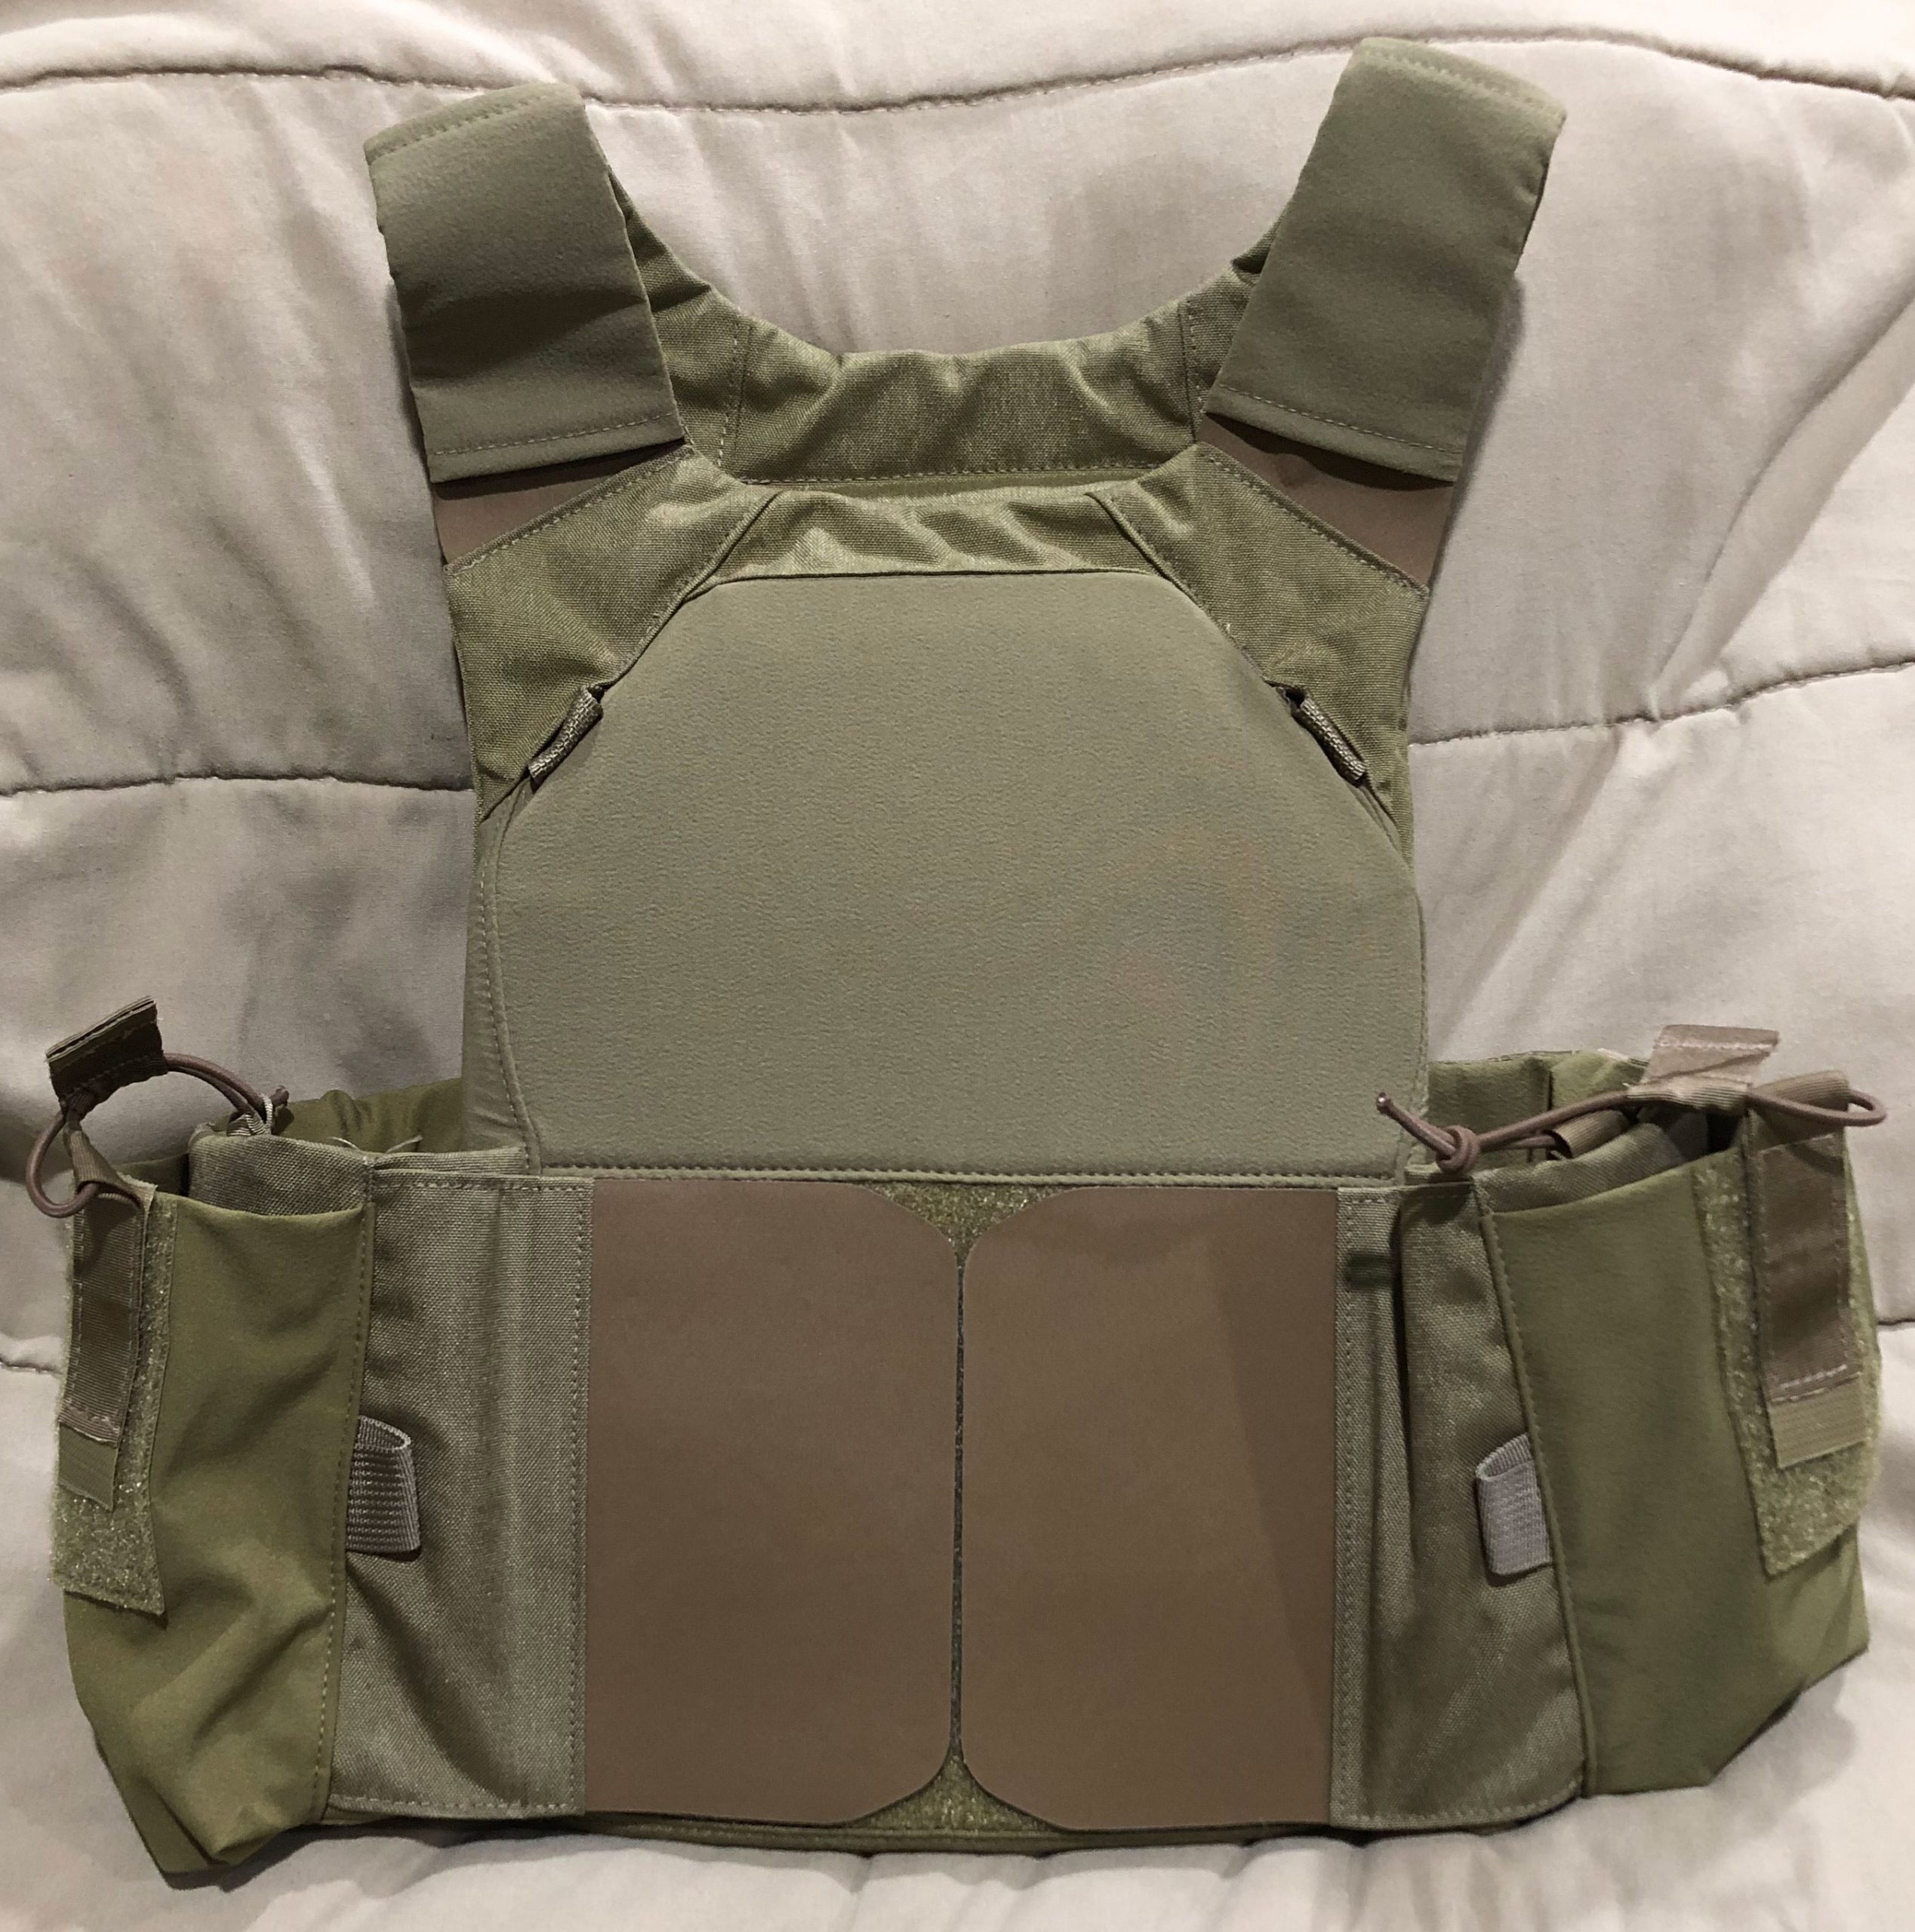 Crye LV-MBAV is a vibe : r/tacticalgear